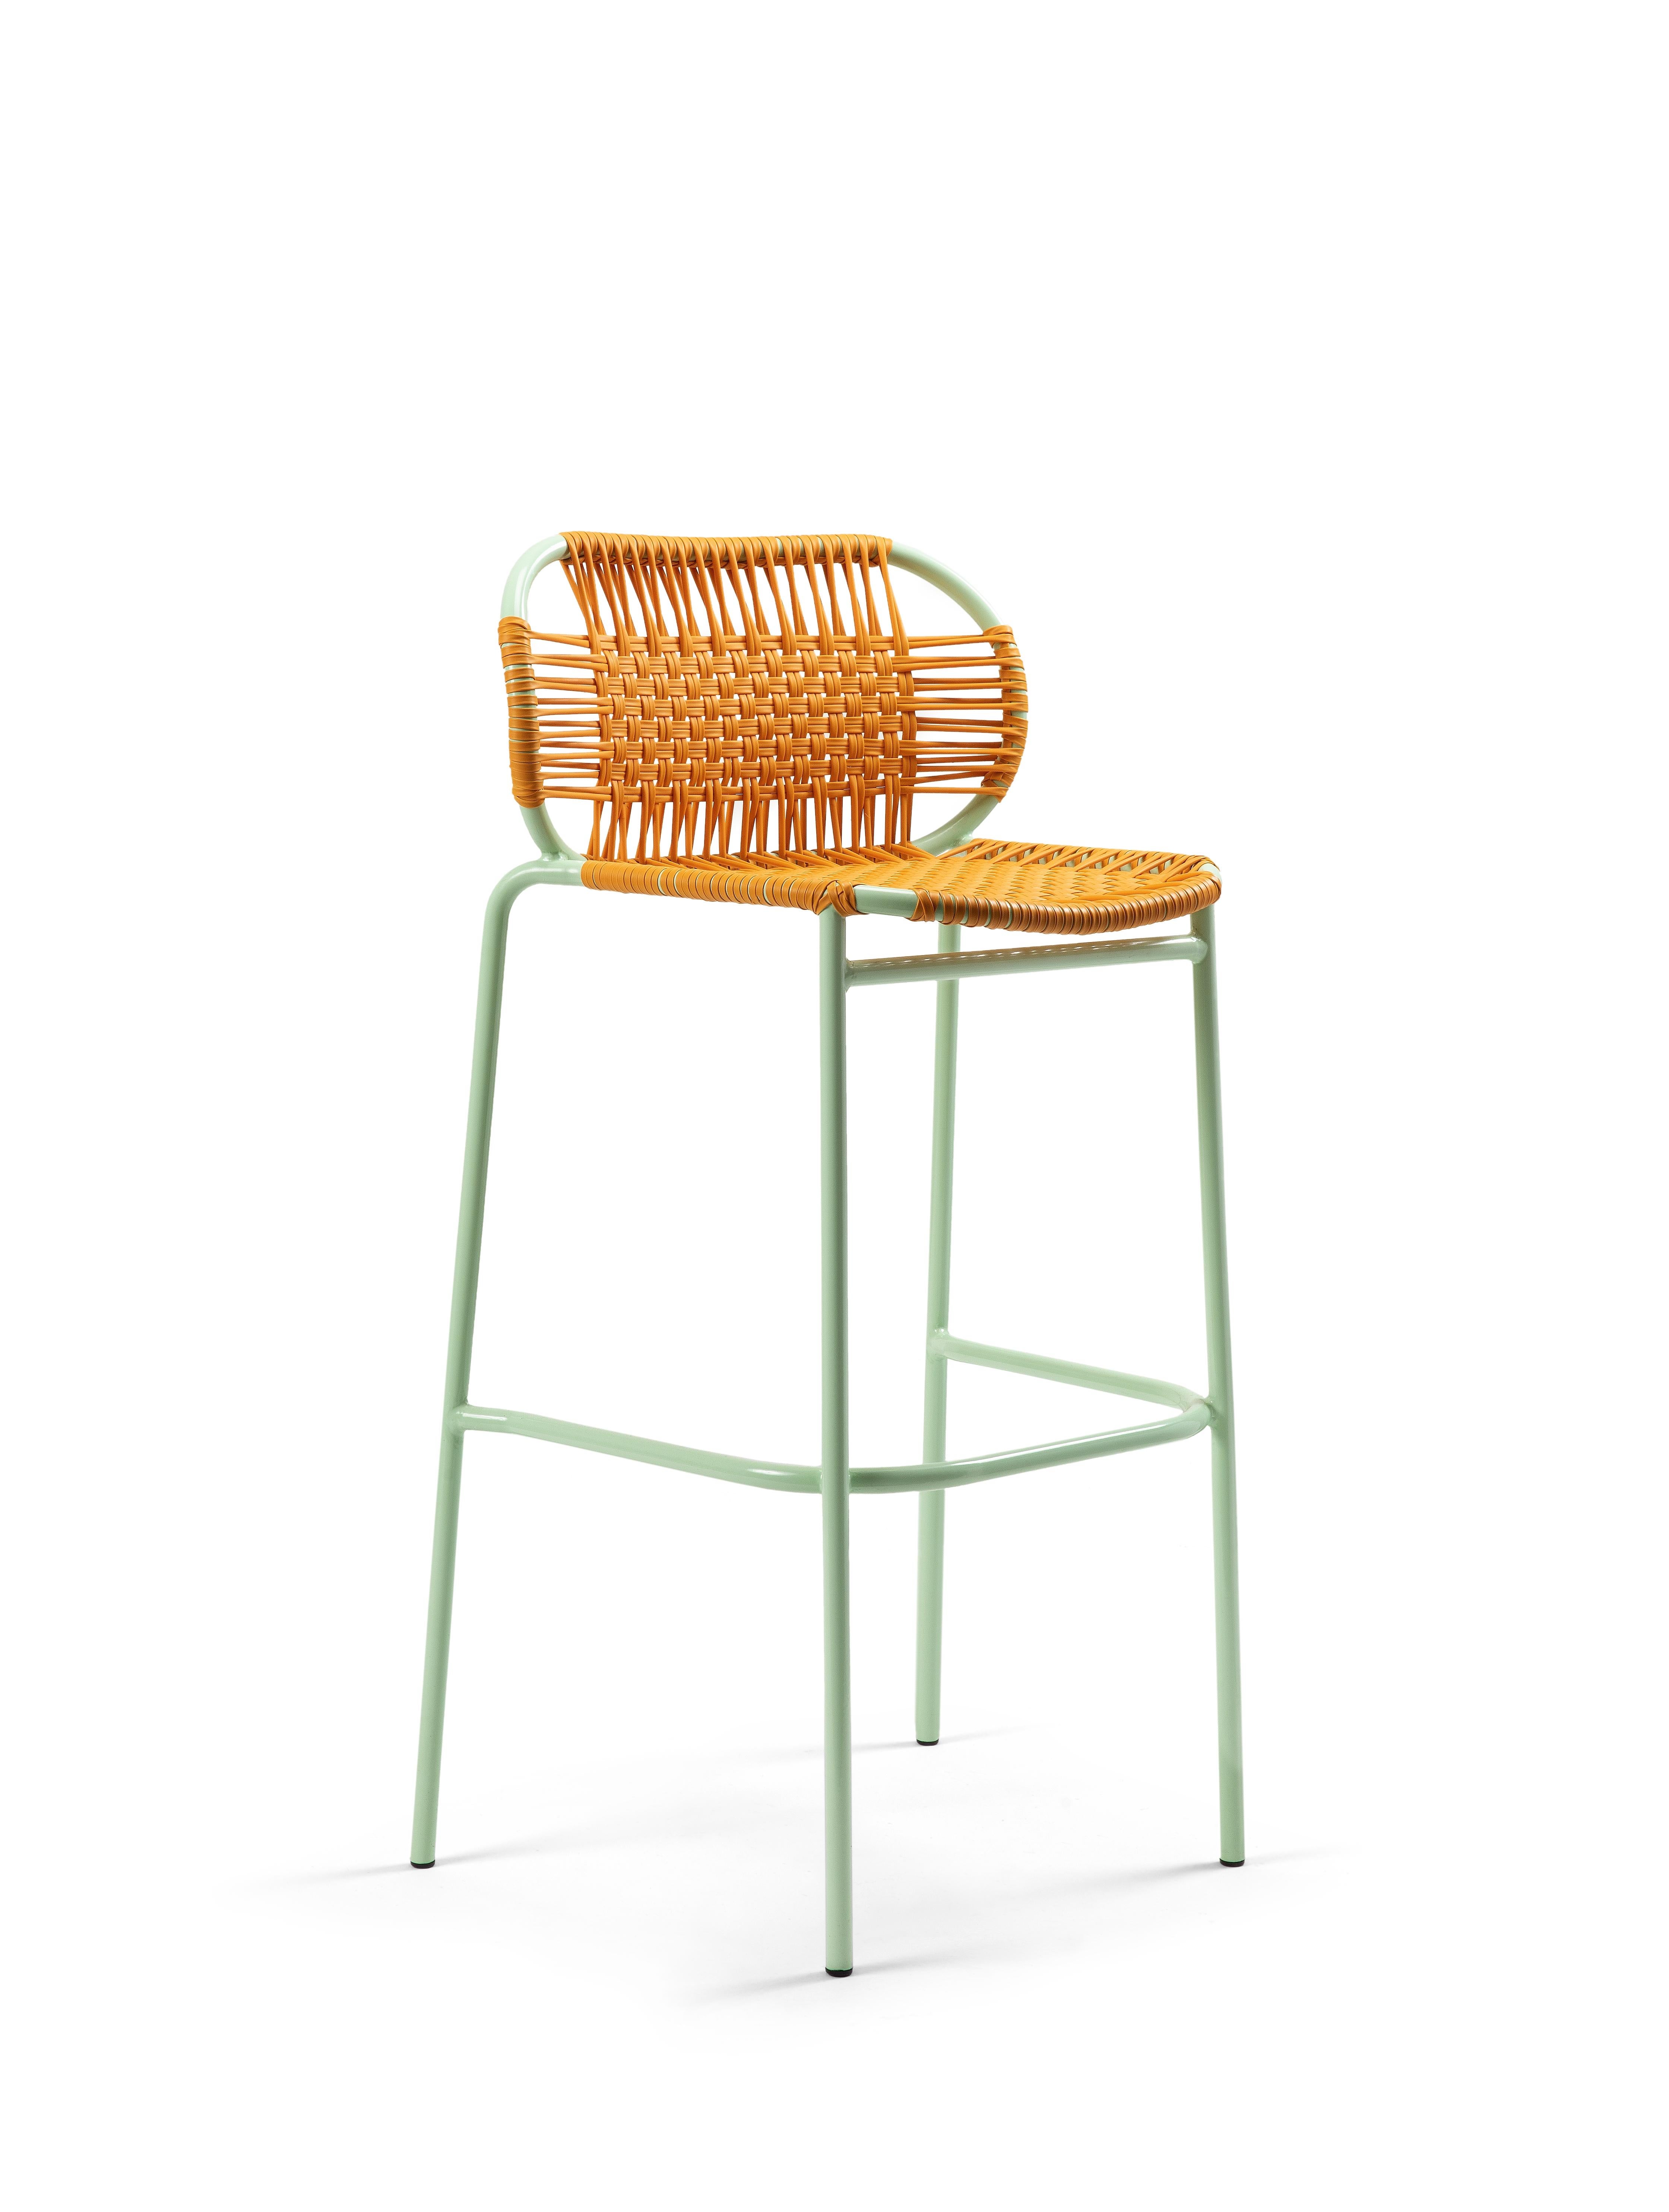 Set of 4 honey Cielo bar stool by Sebastian Herkner.
Materials: galvanized and powder-coated tubular steel. PVC strings are made from recycled plastic.
Technique: Made from recycled plastic and weaved by local craftspeople in Cartagena, Colombia.